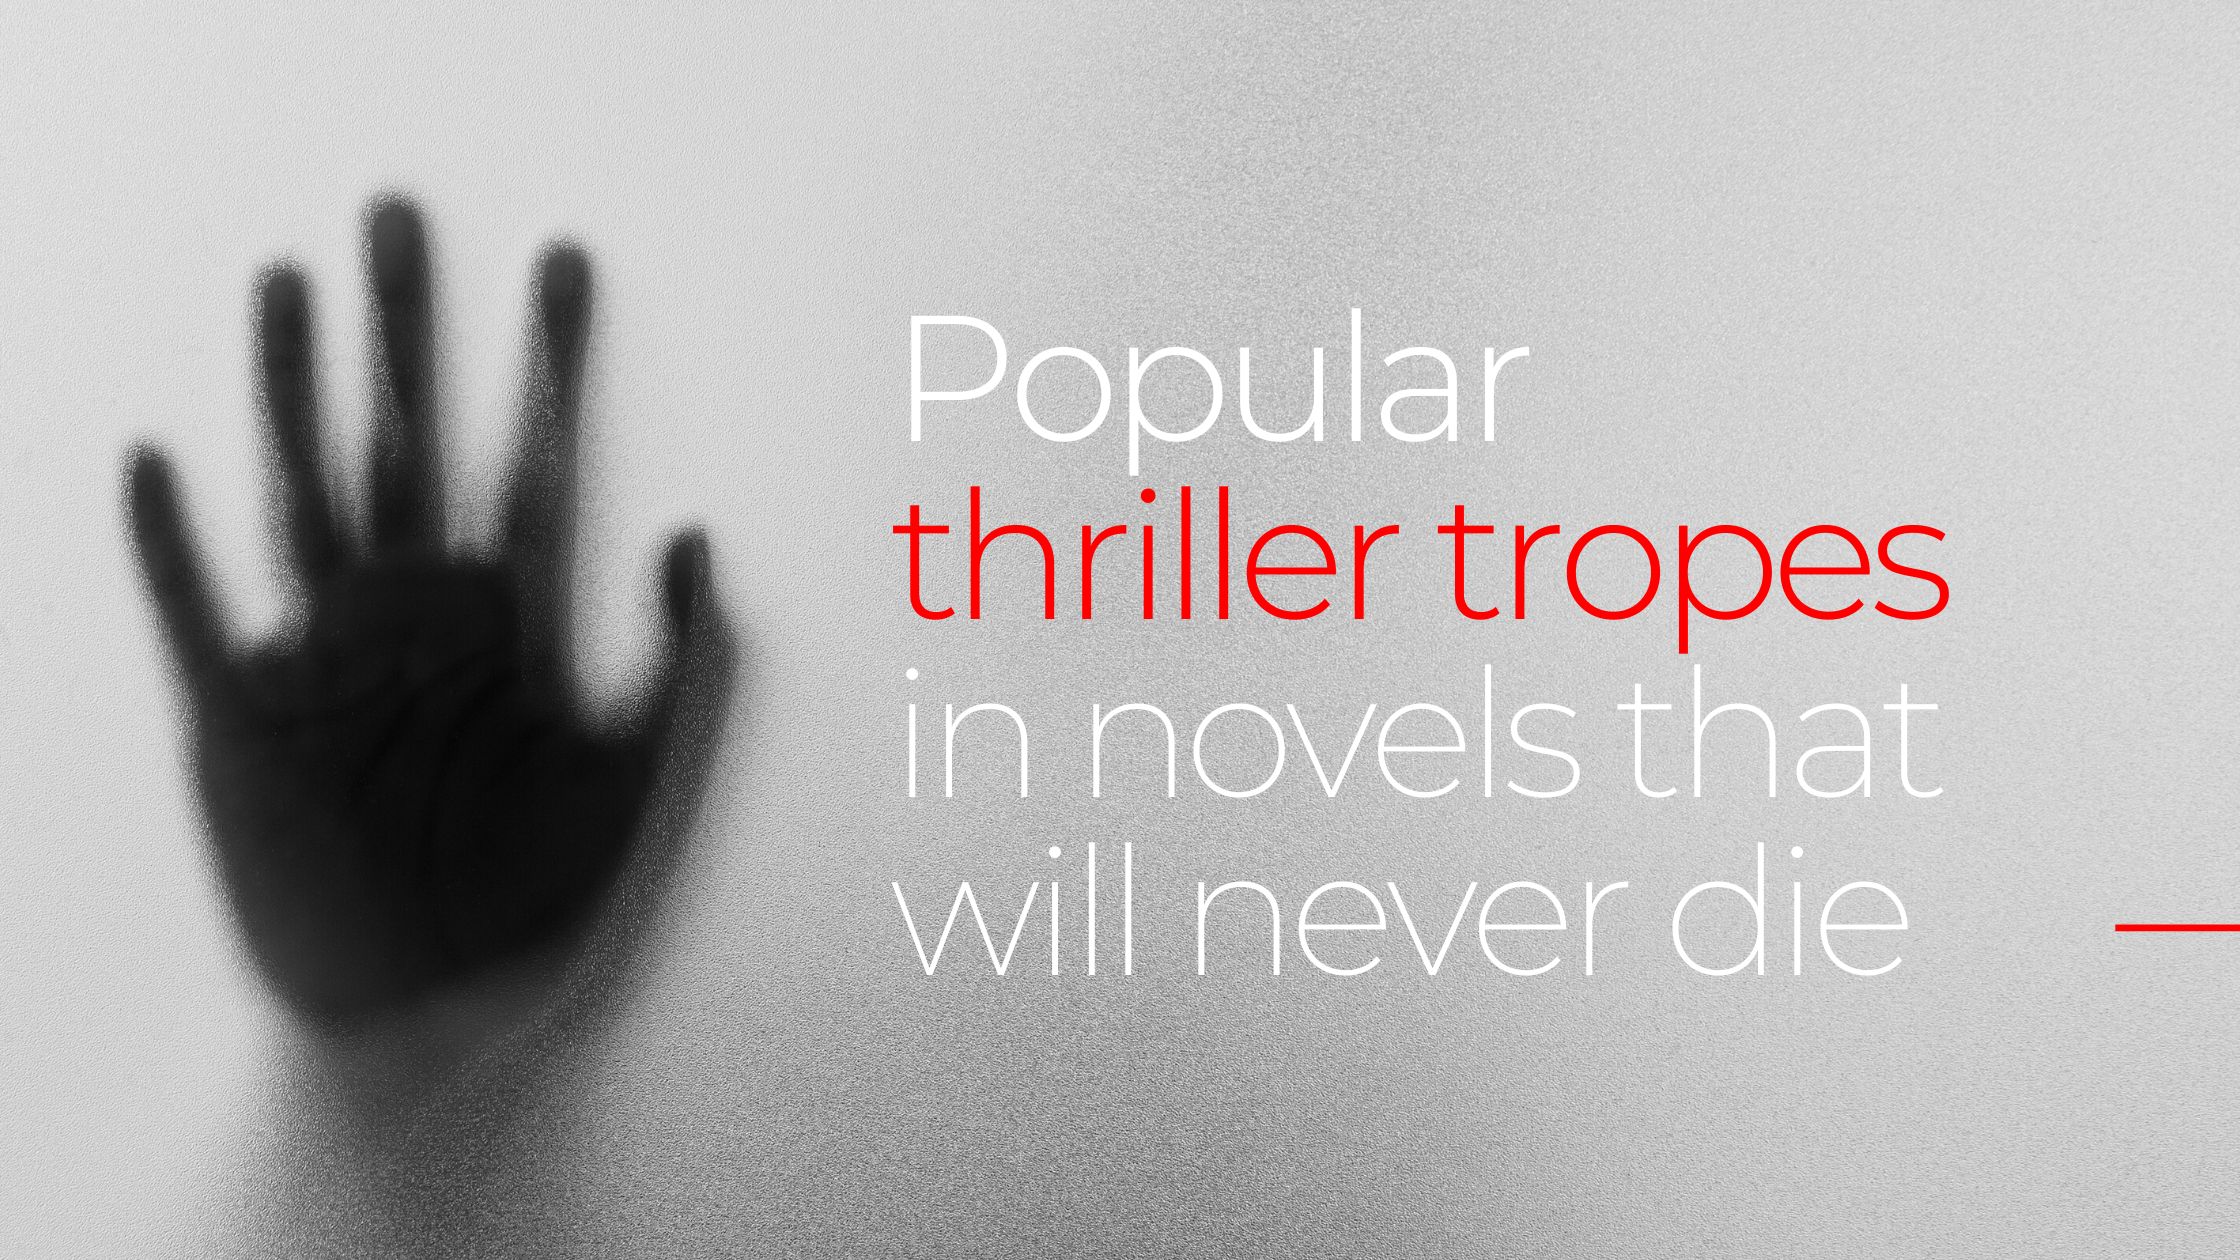 Popular thriller tropes in novels that will never die